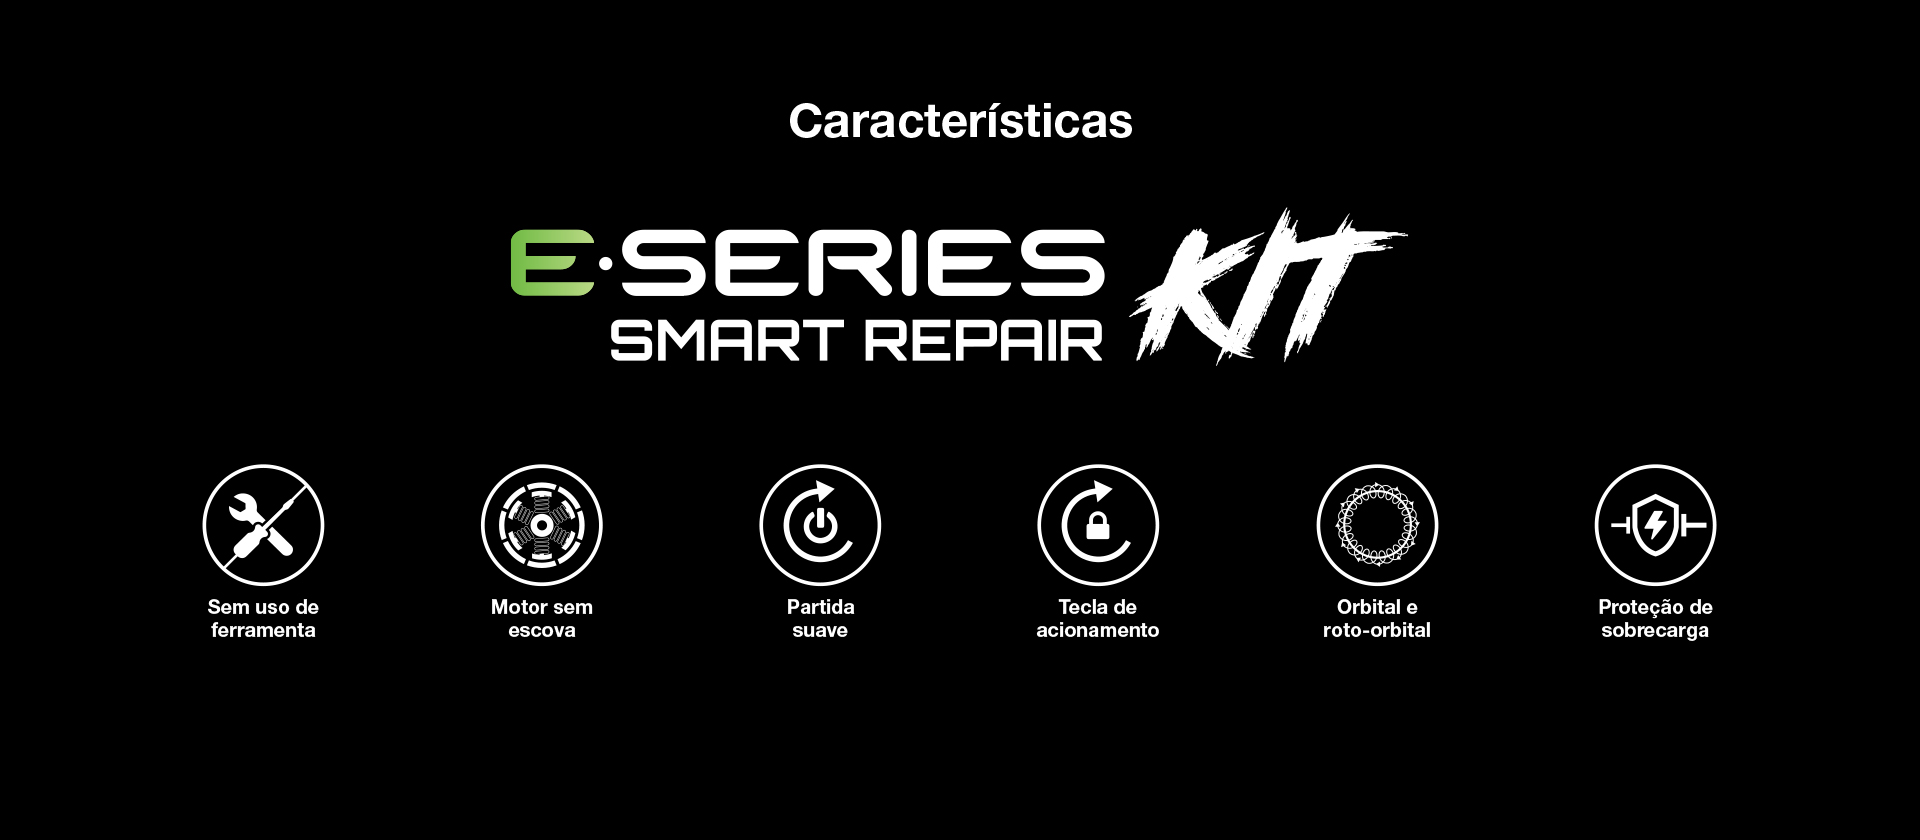 PRO X Smart Repair Kit Features and Benefits